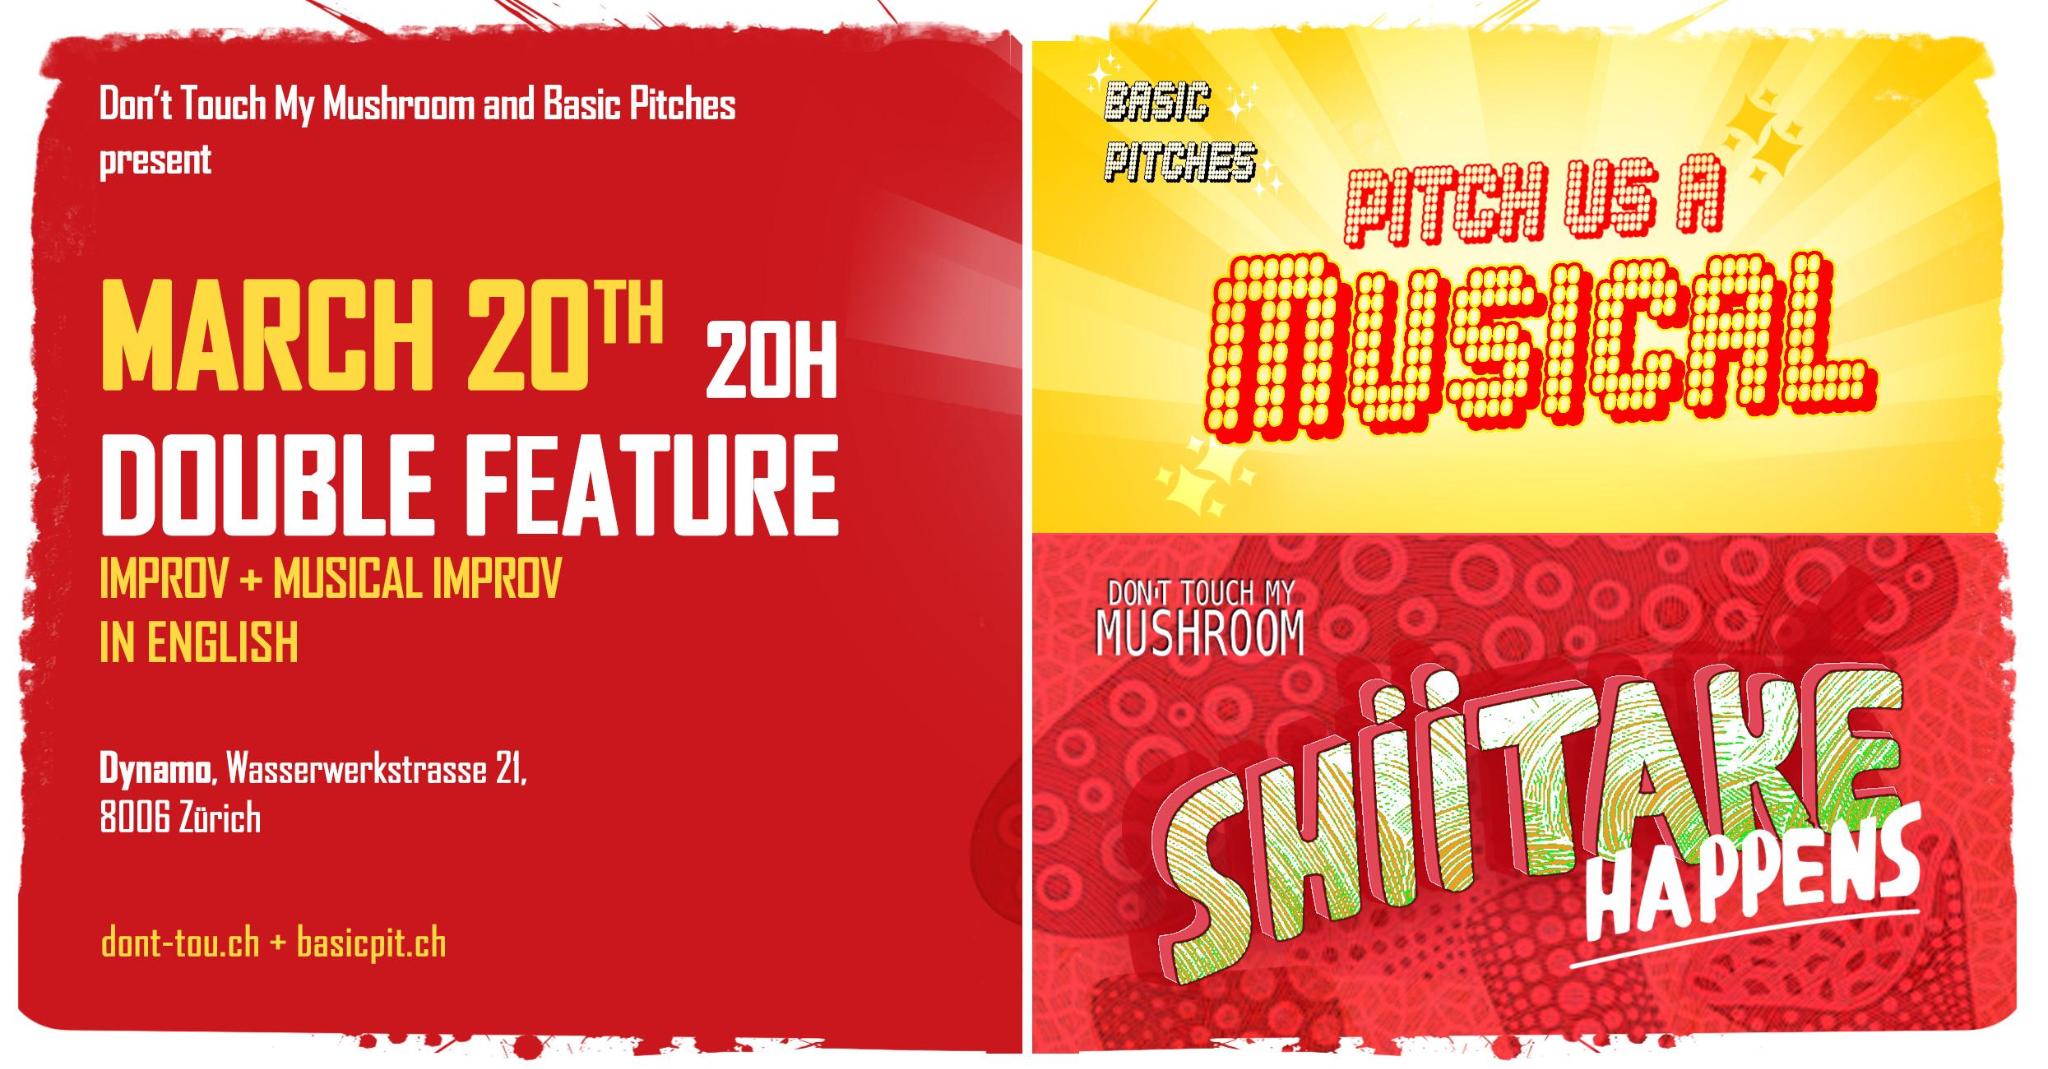 Double feature - Basic Pitches: Pitch us a Musical & DTMM: Shiitake Happens